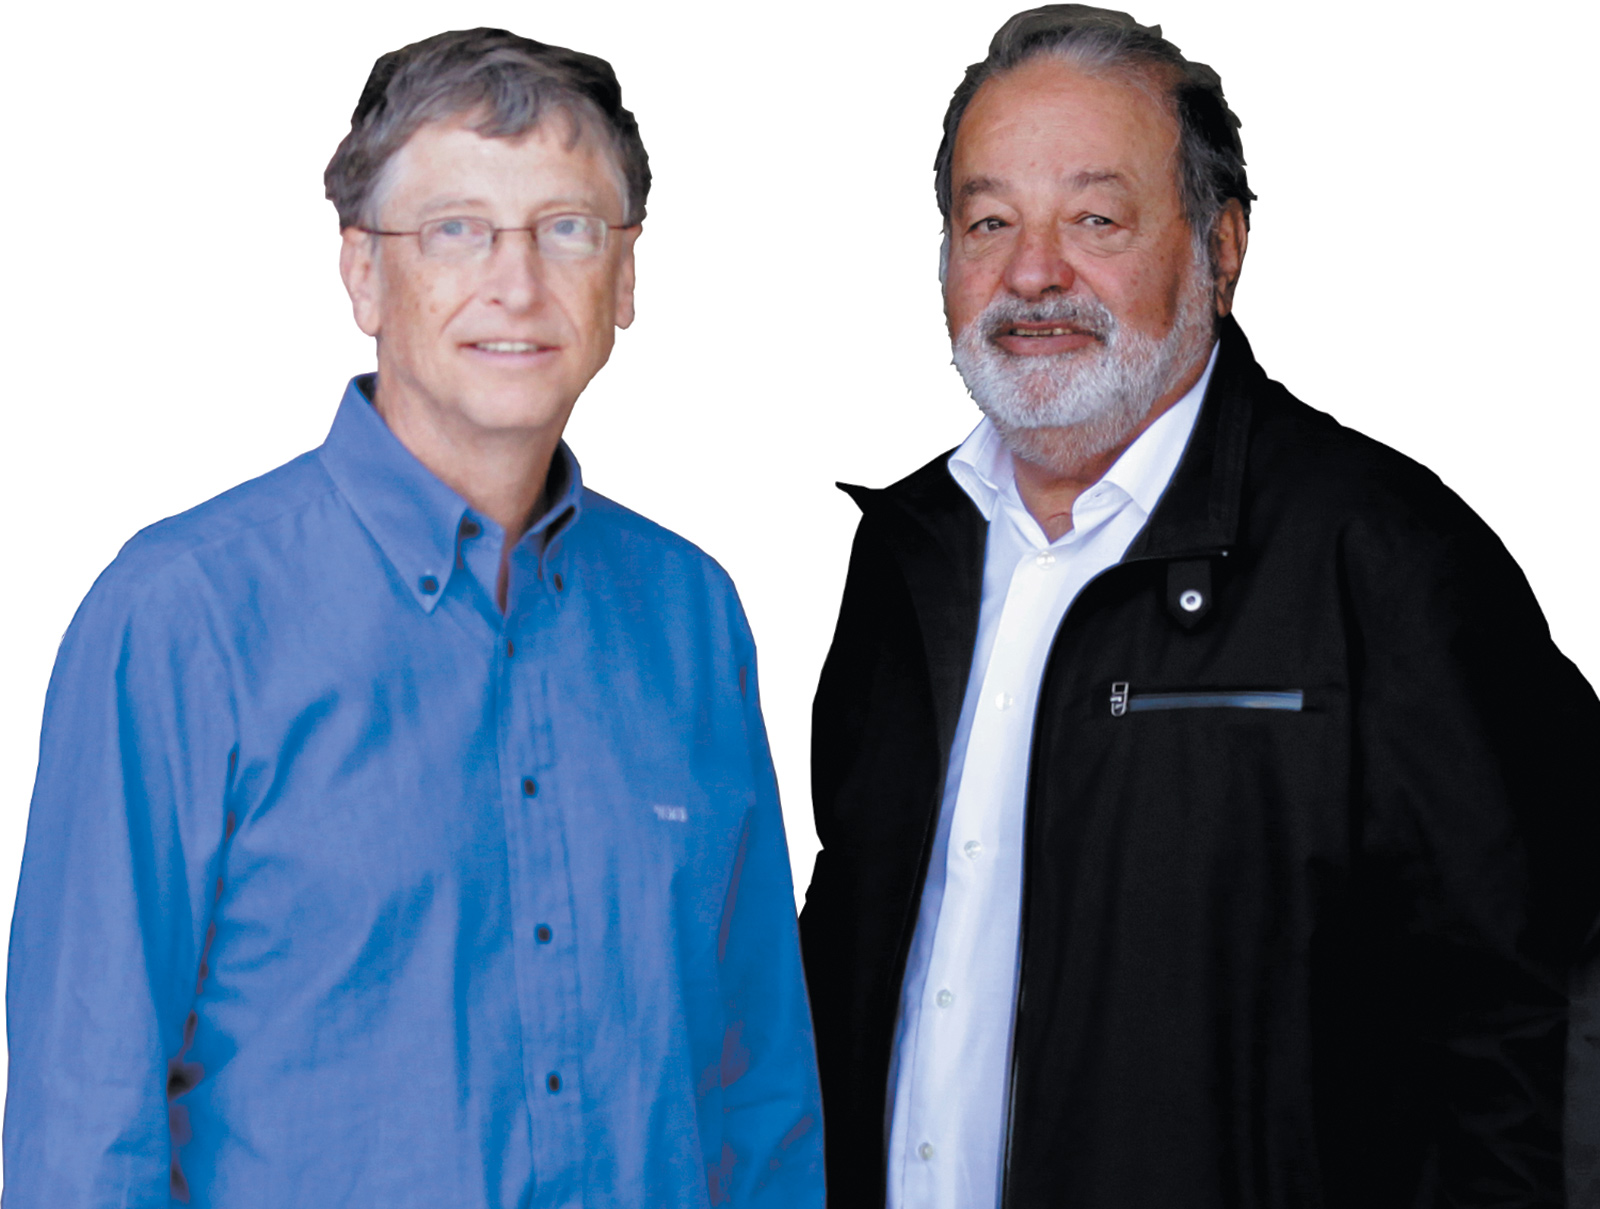 Billionaires Bill Gates and Carlos Slim at the opening of a new research facility for the International Maize and Wheat Improvement Center, Texcoco, Mexico, February 2013 